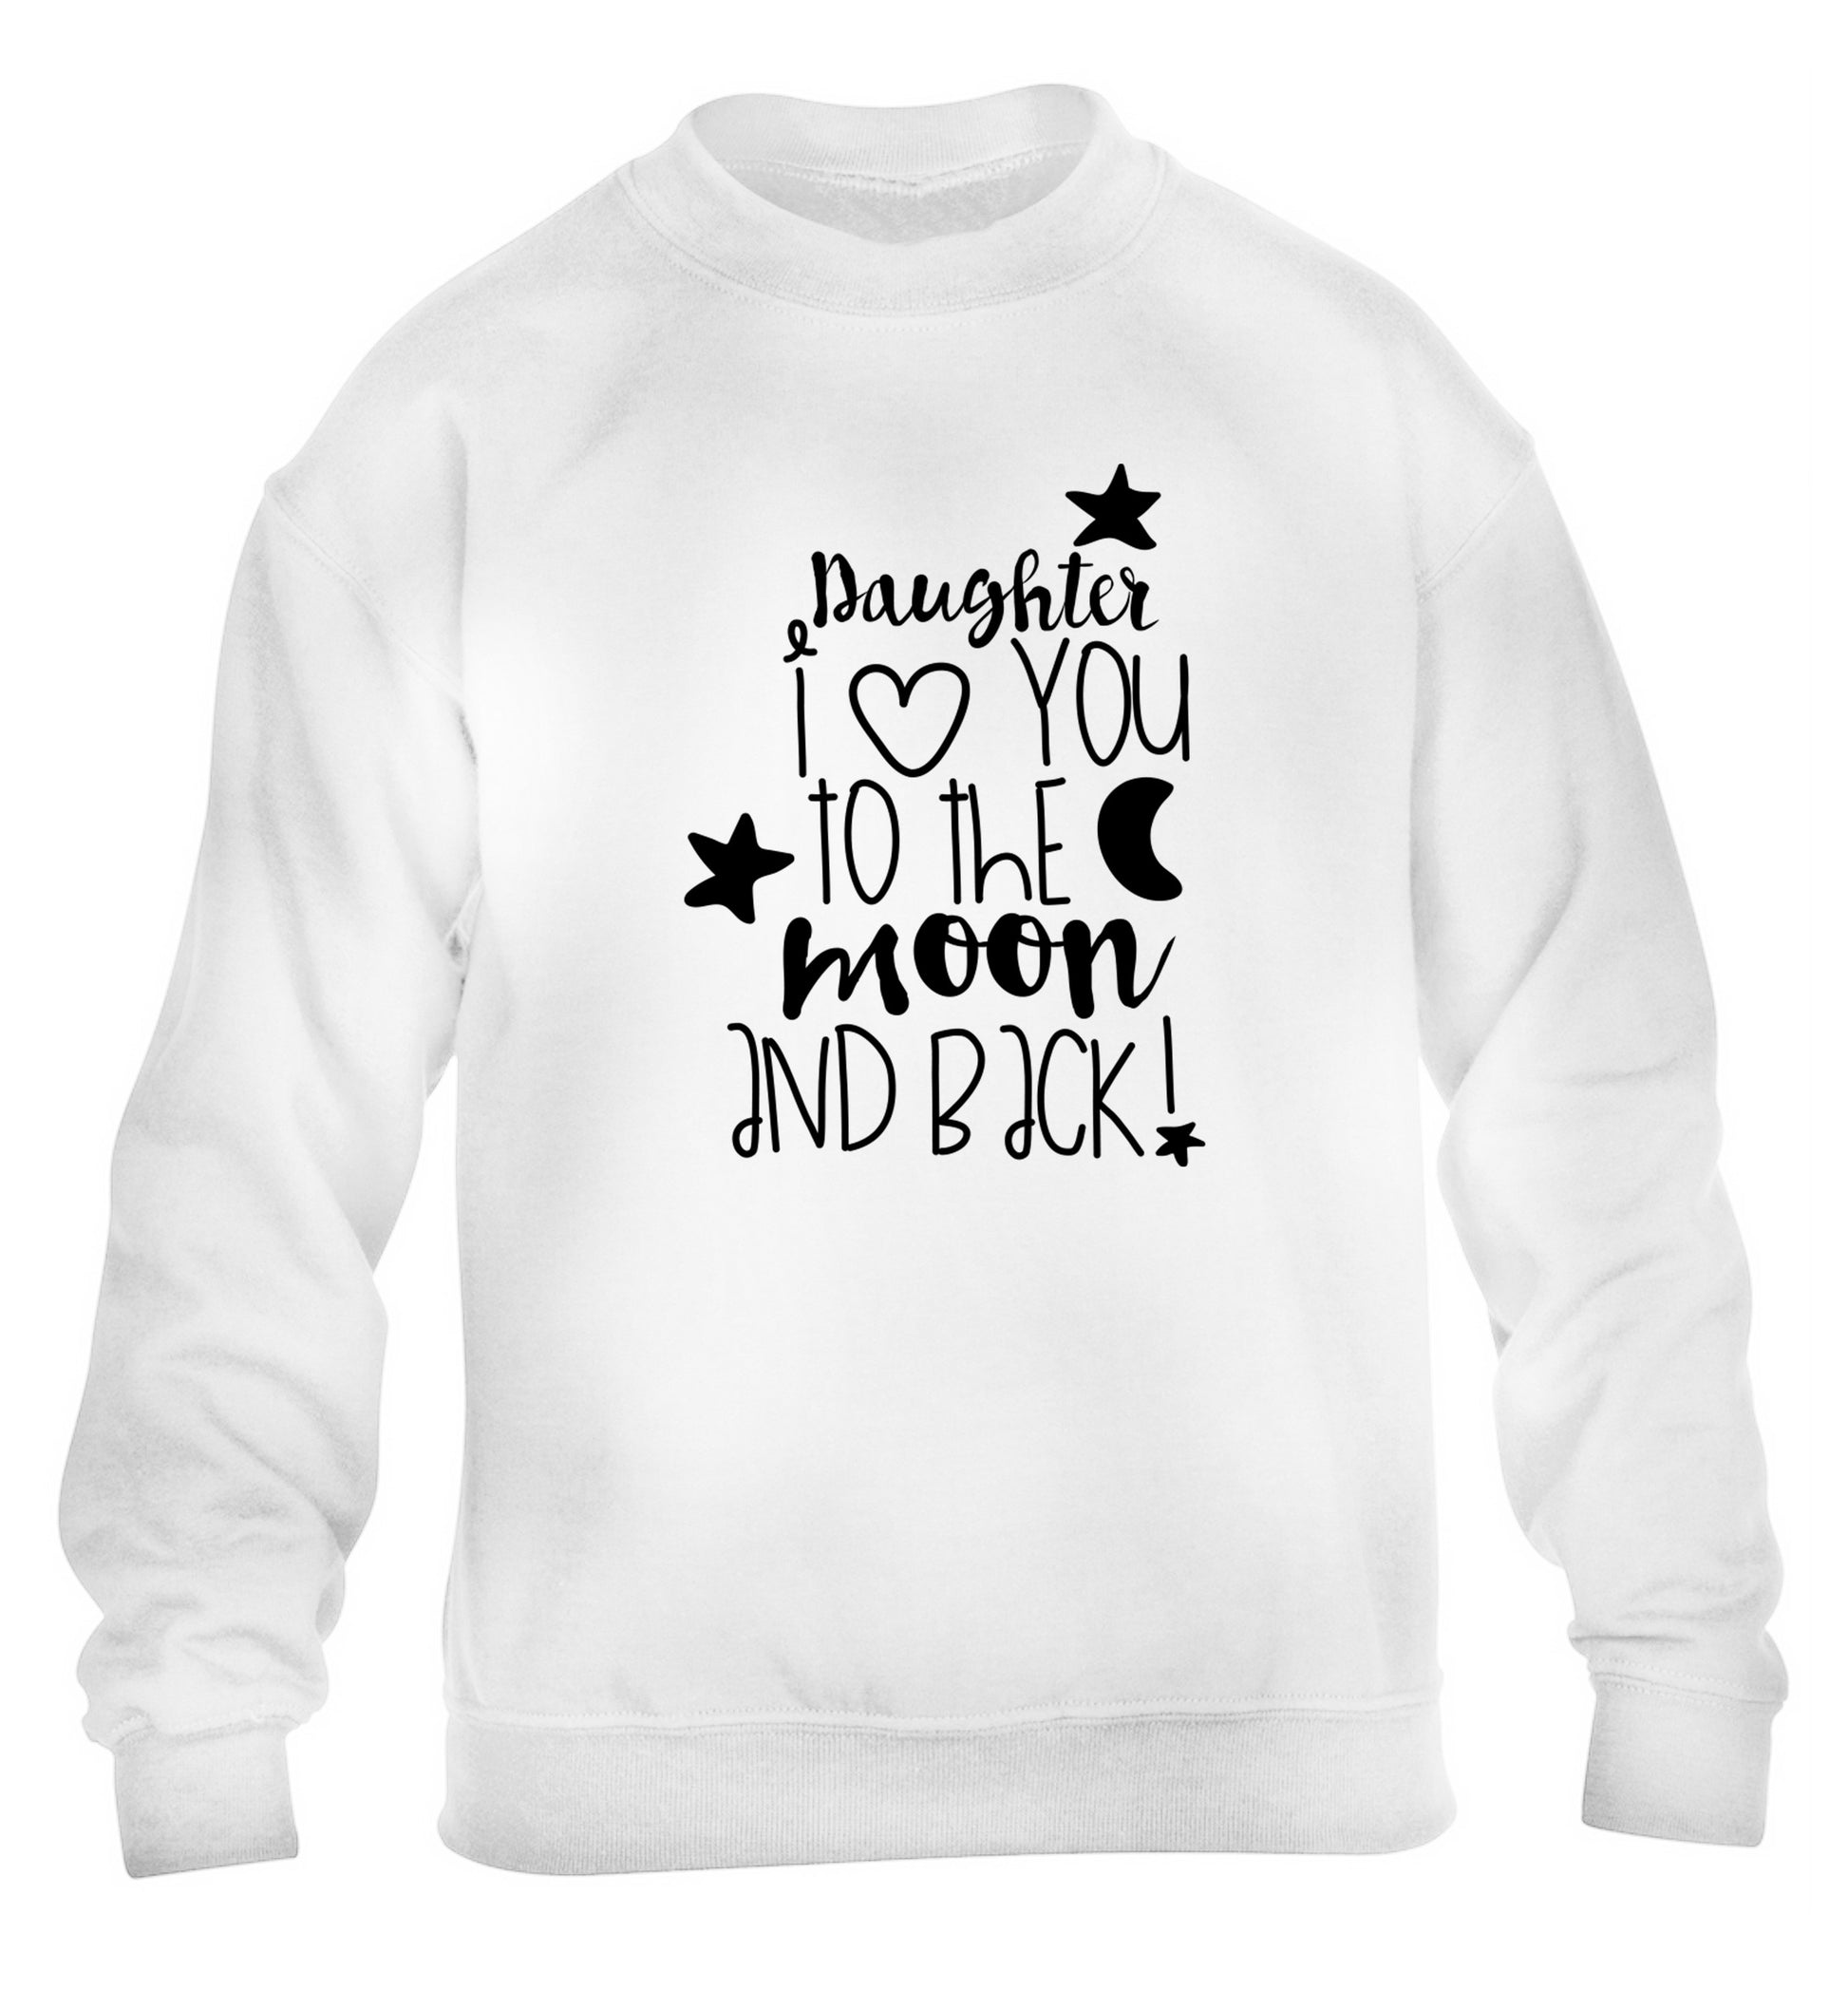 Daughter I love you to the moon and back children's white  sweater 12-14 Years